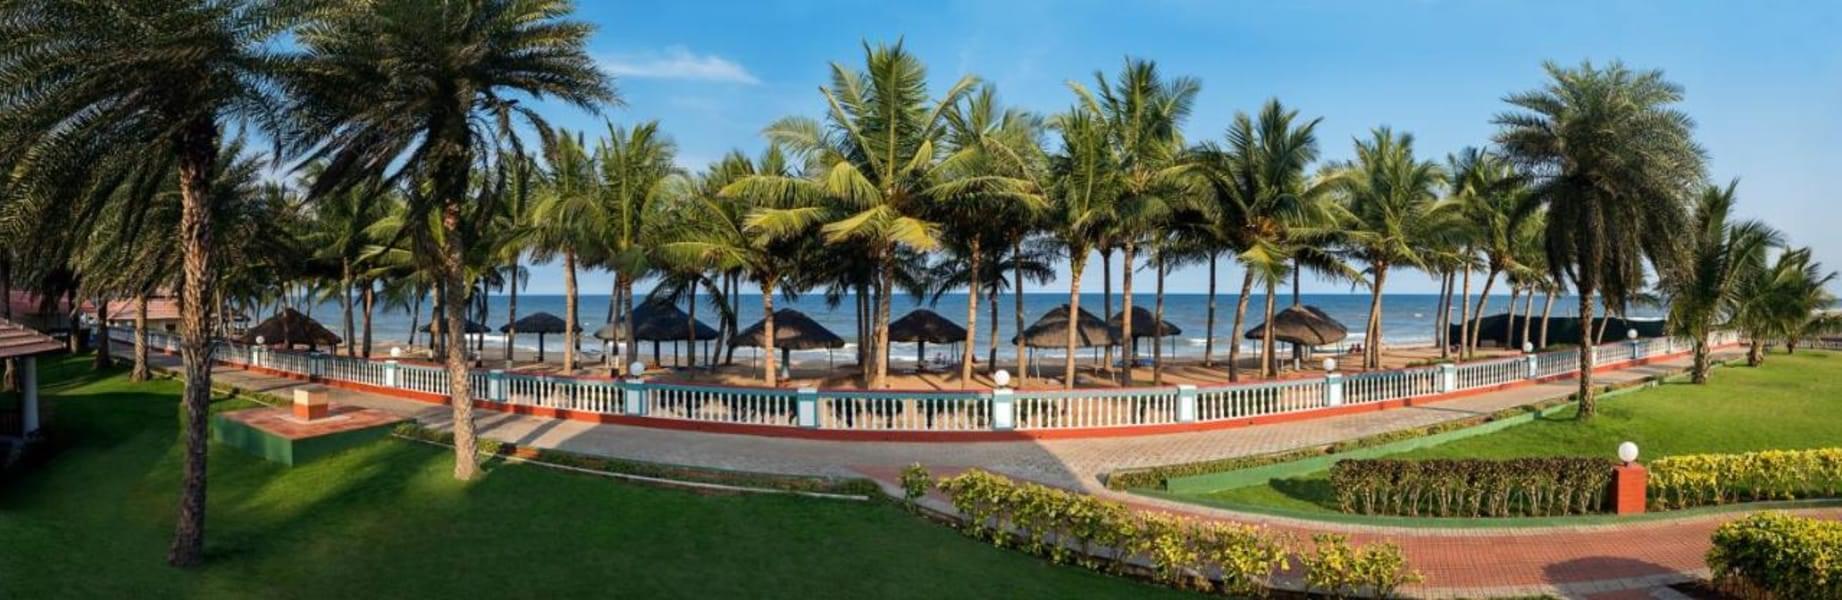 Best Selling Resorts in Chennai: Upto 45% Off